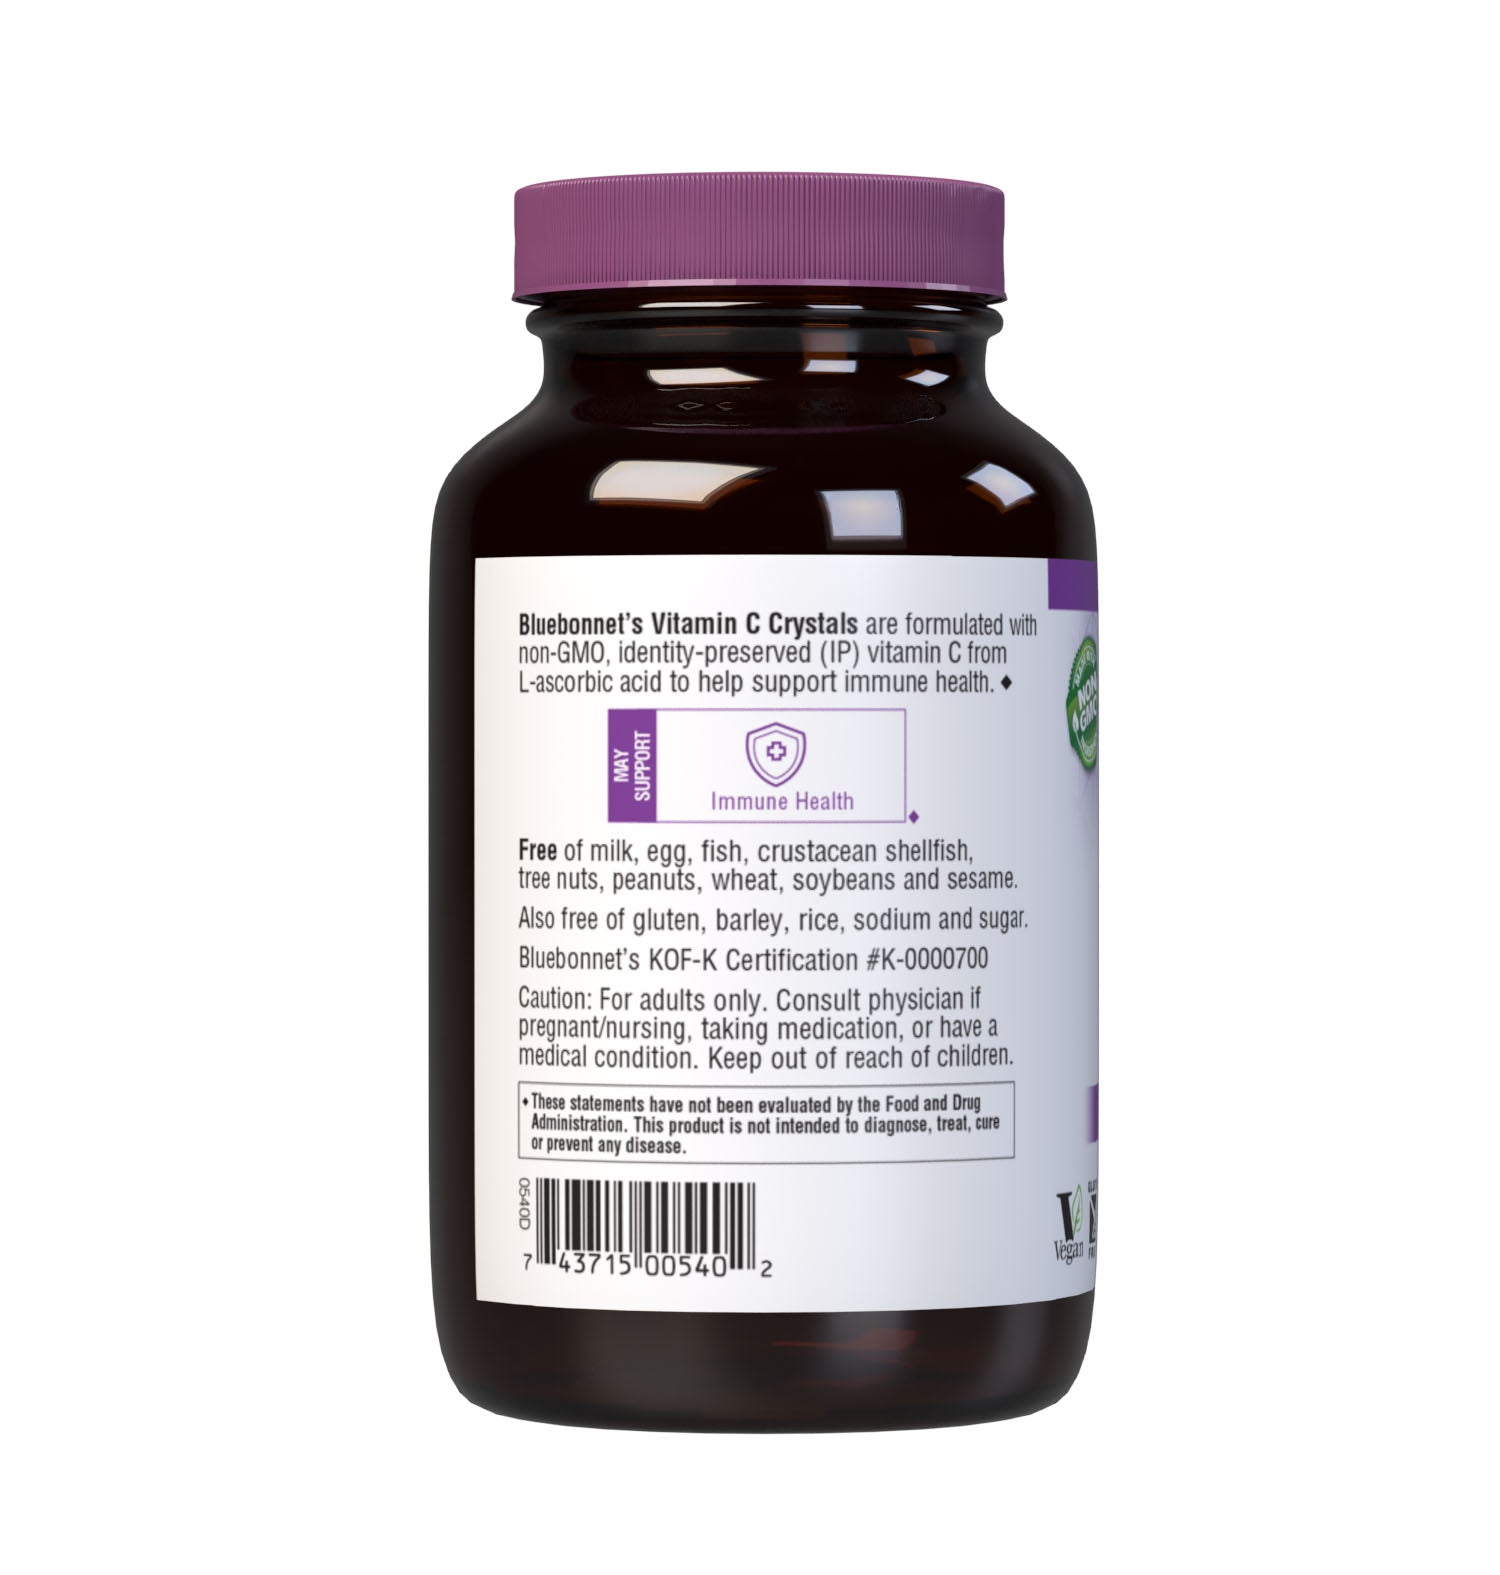 Bluebonnet’s Vitamin C Crystals are formulated with identity preserved (IP) L-ascorbic acid in its crystalline form to help support immune function. There are no excipients present. Description panel. #size_4.4oz